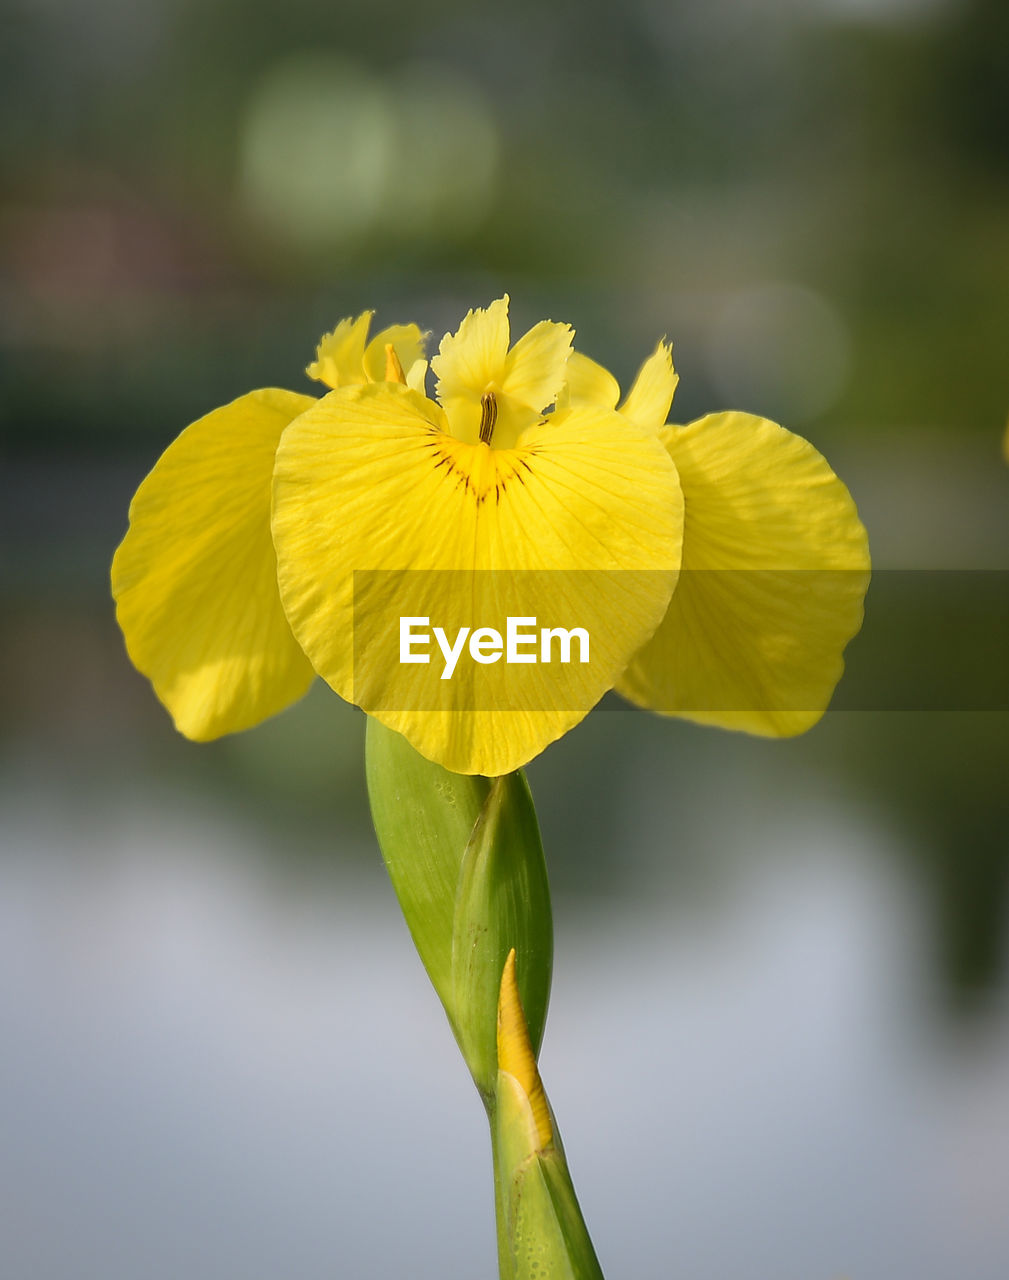 yellow, flower, flowering plant, plant, freshness, beauty in nature, fragility, flower head, petal, close-up, inflorescence, nature, macro photography, green, growth, focus on foreground, plant stem, no people, blossom, springtime, outdoors, wildflower, botany, day